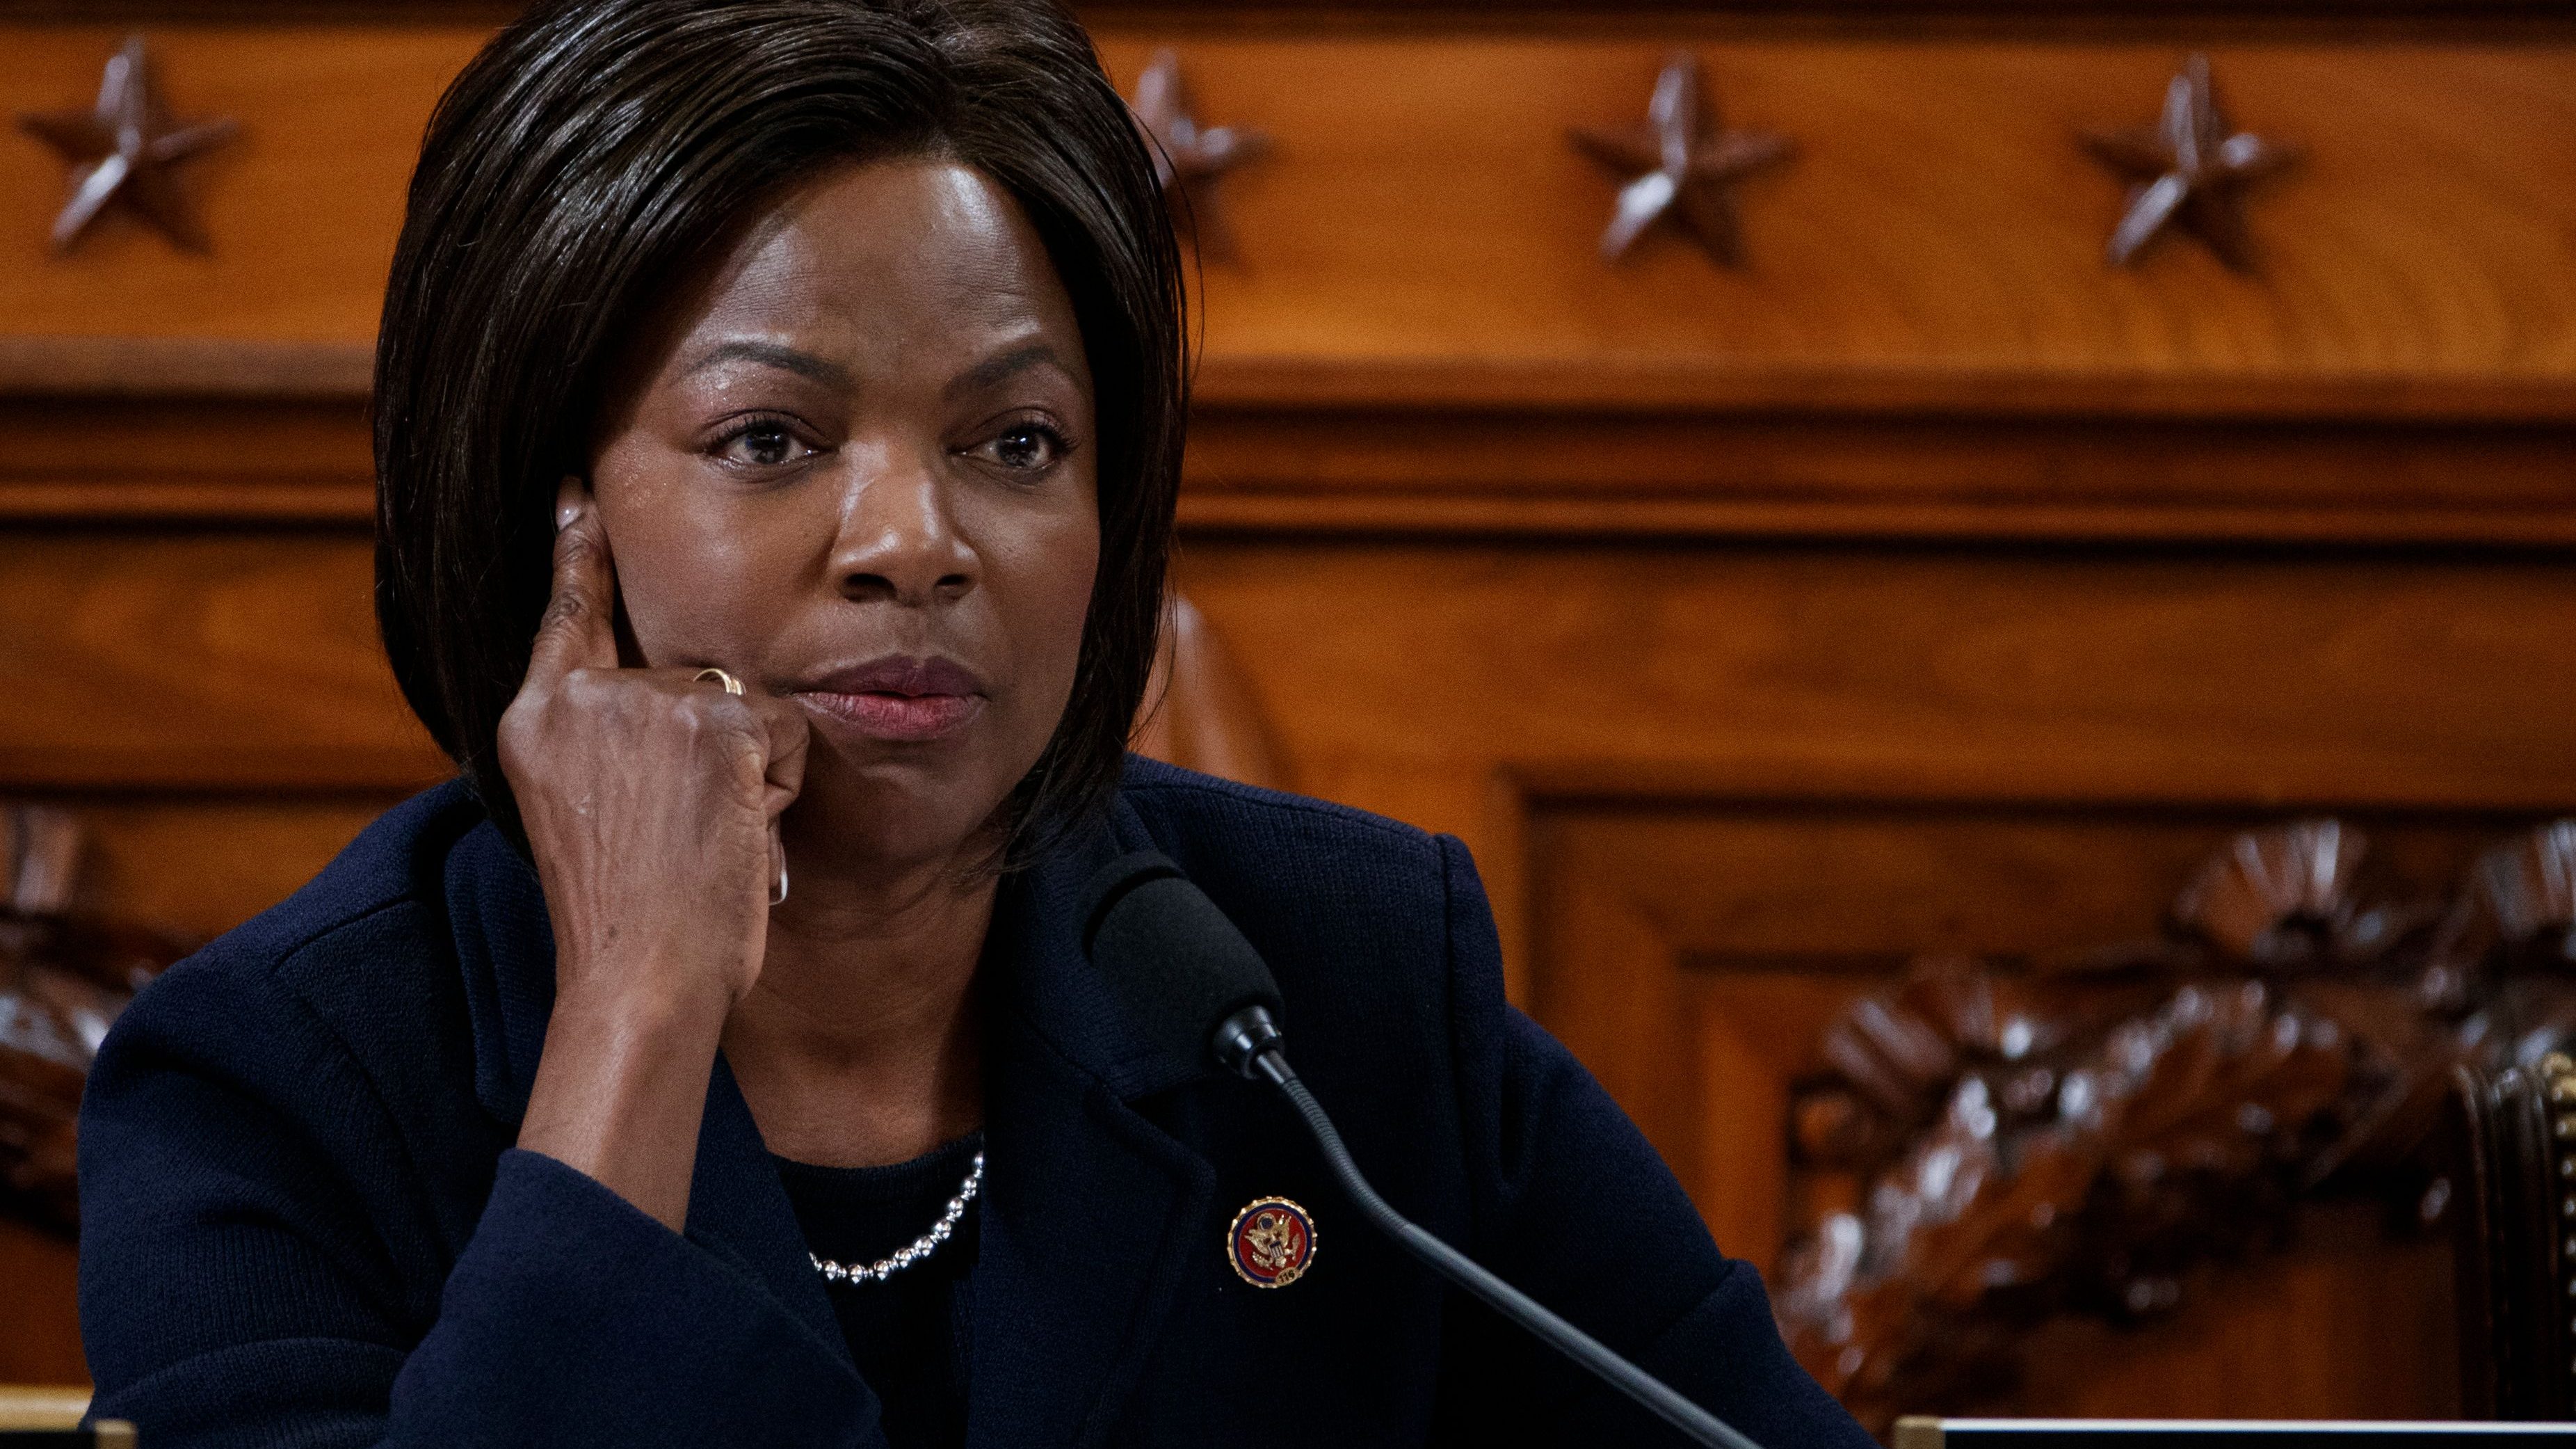 Val Demings 5 Fast Facts You Need to Know